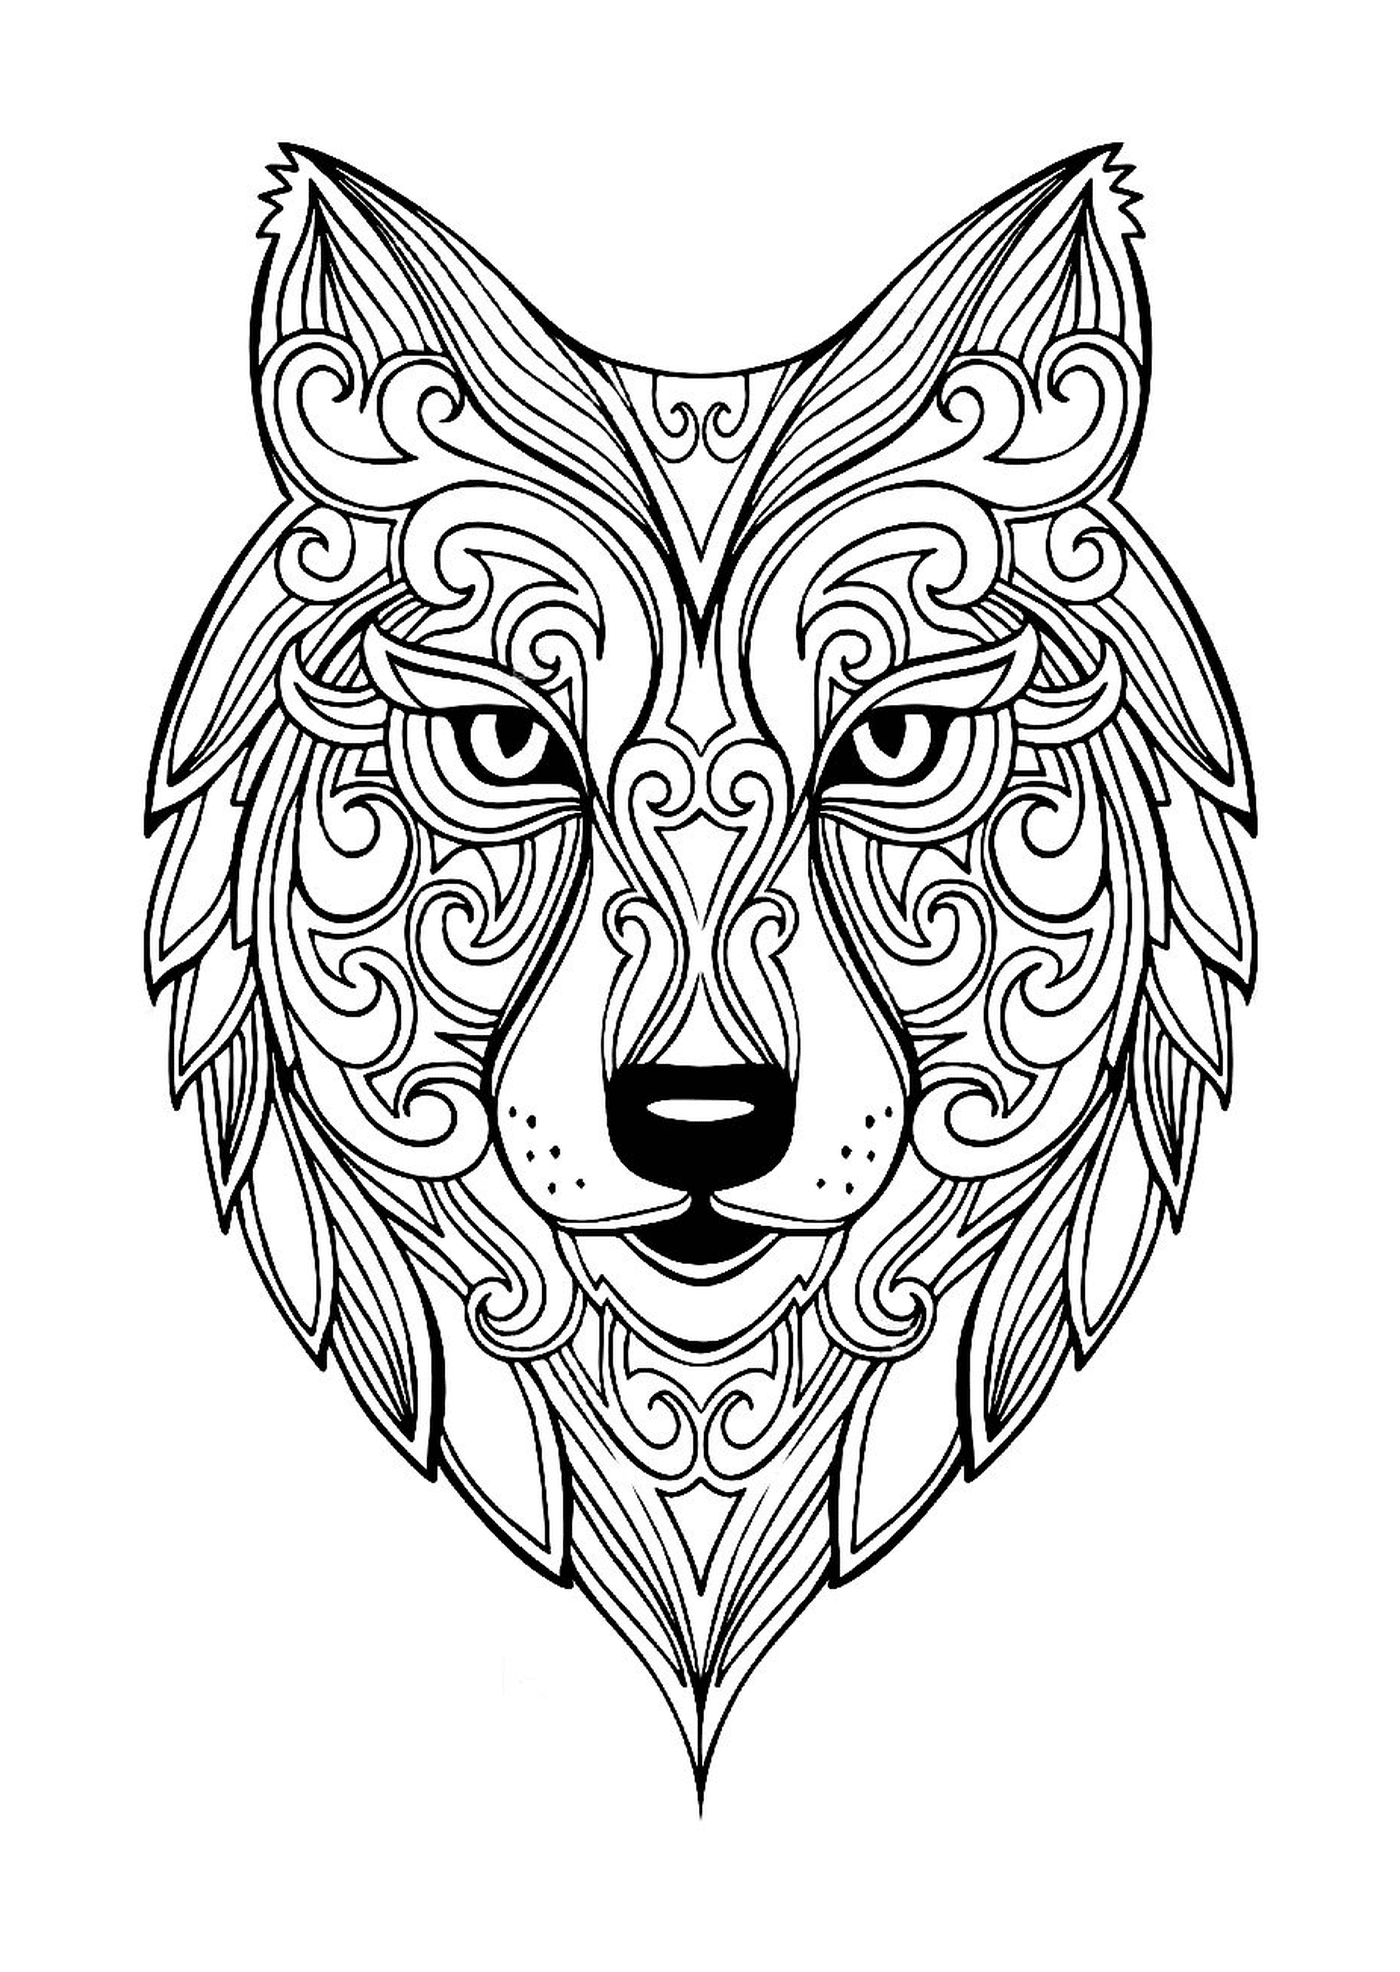  Wolfhead with patterns 